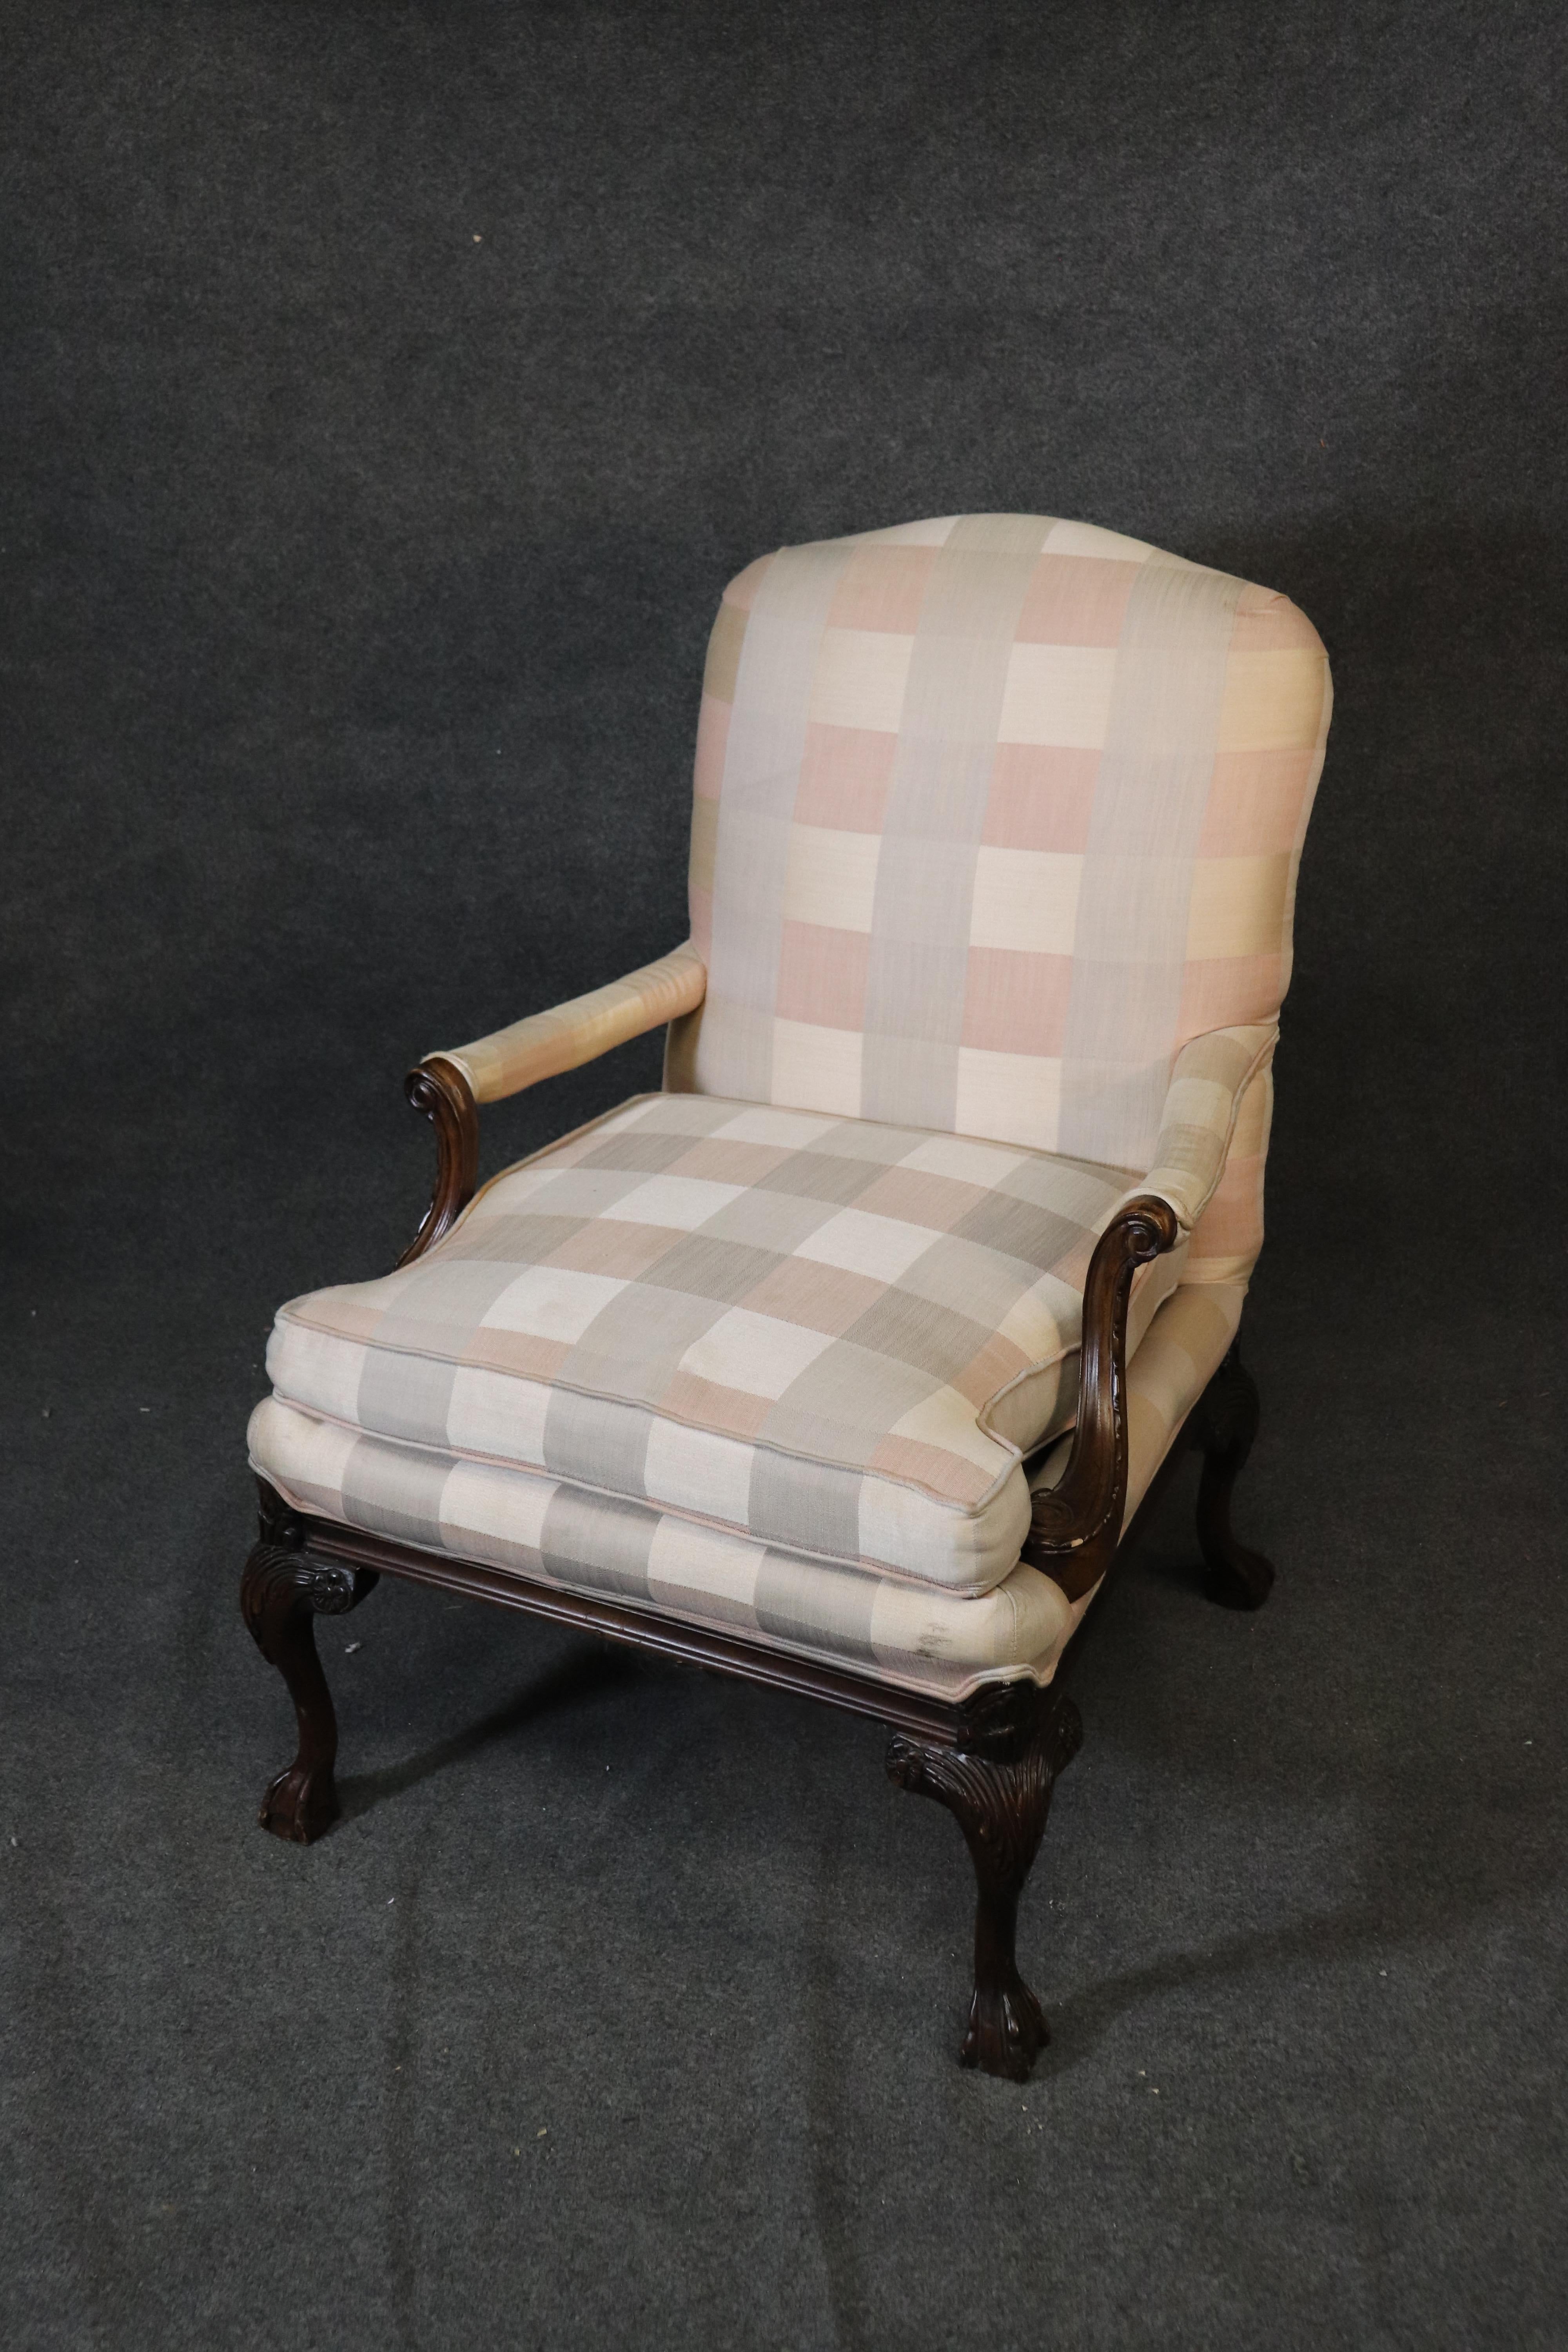 This is a fine quality mahogany carved Georgian style bergere chair and ottoman. The chair and ottoman are in good vintage condition and have subtle signs of use as to be expected. They measure 41 tall x 28 wide x 31 deep and a 21 inch seat height